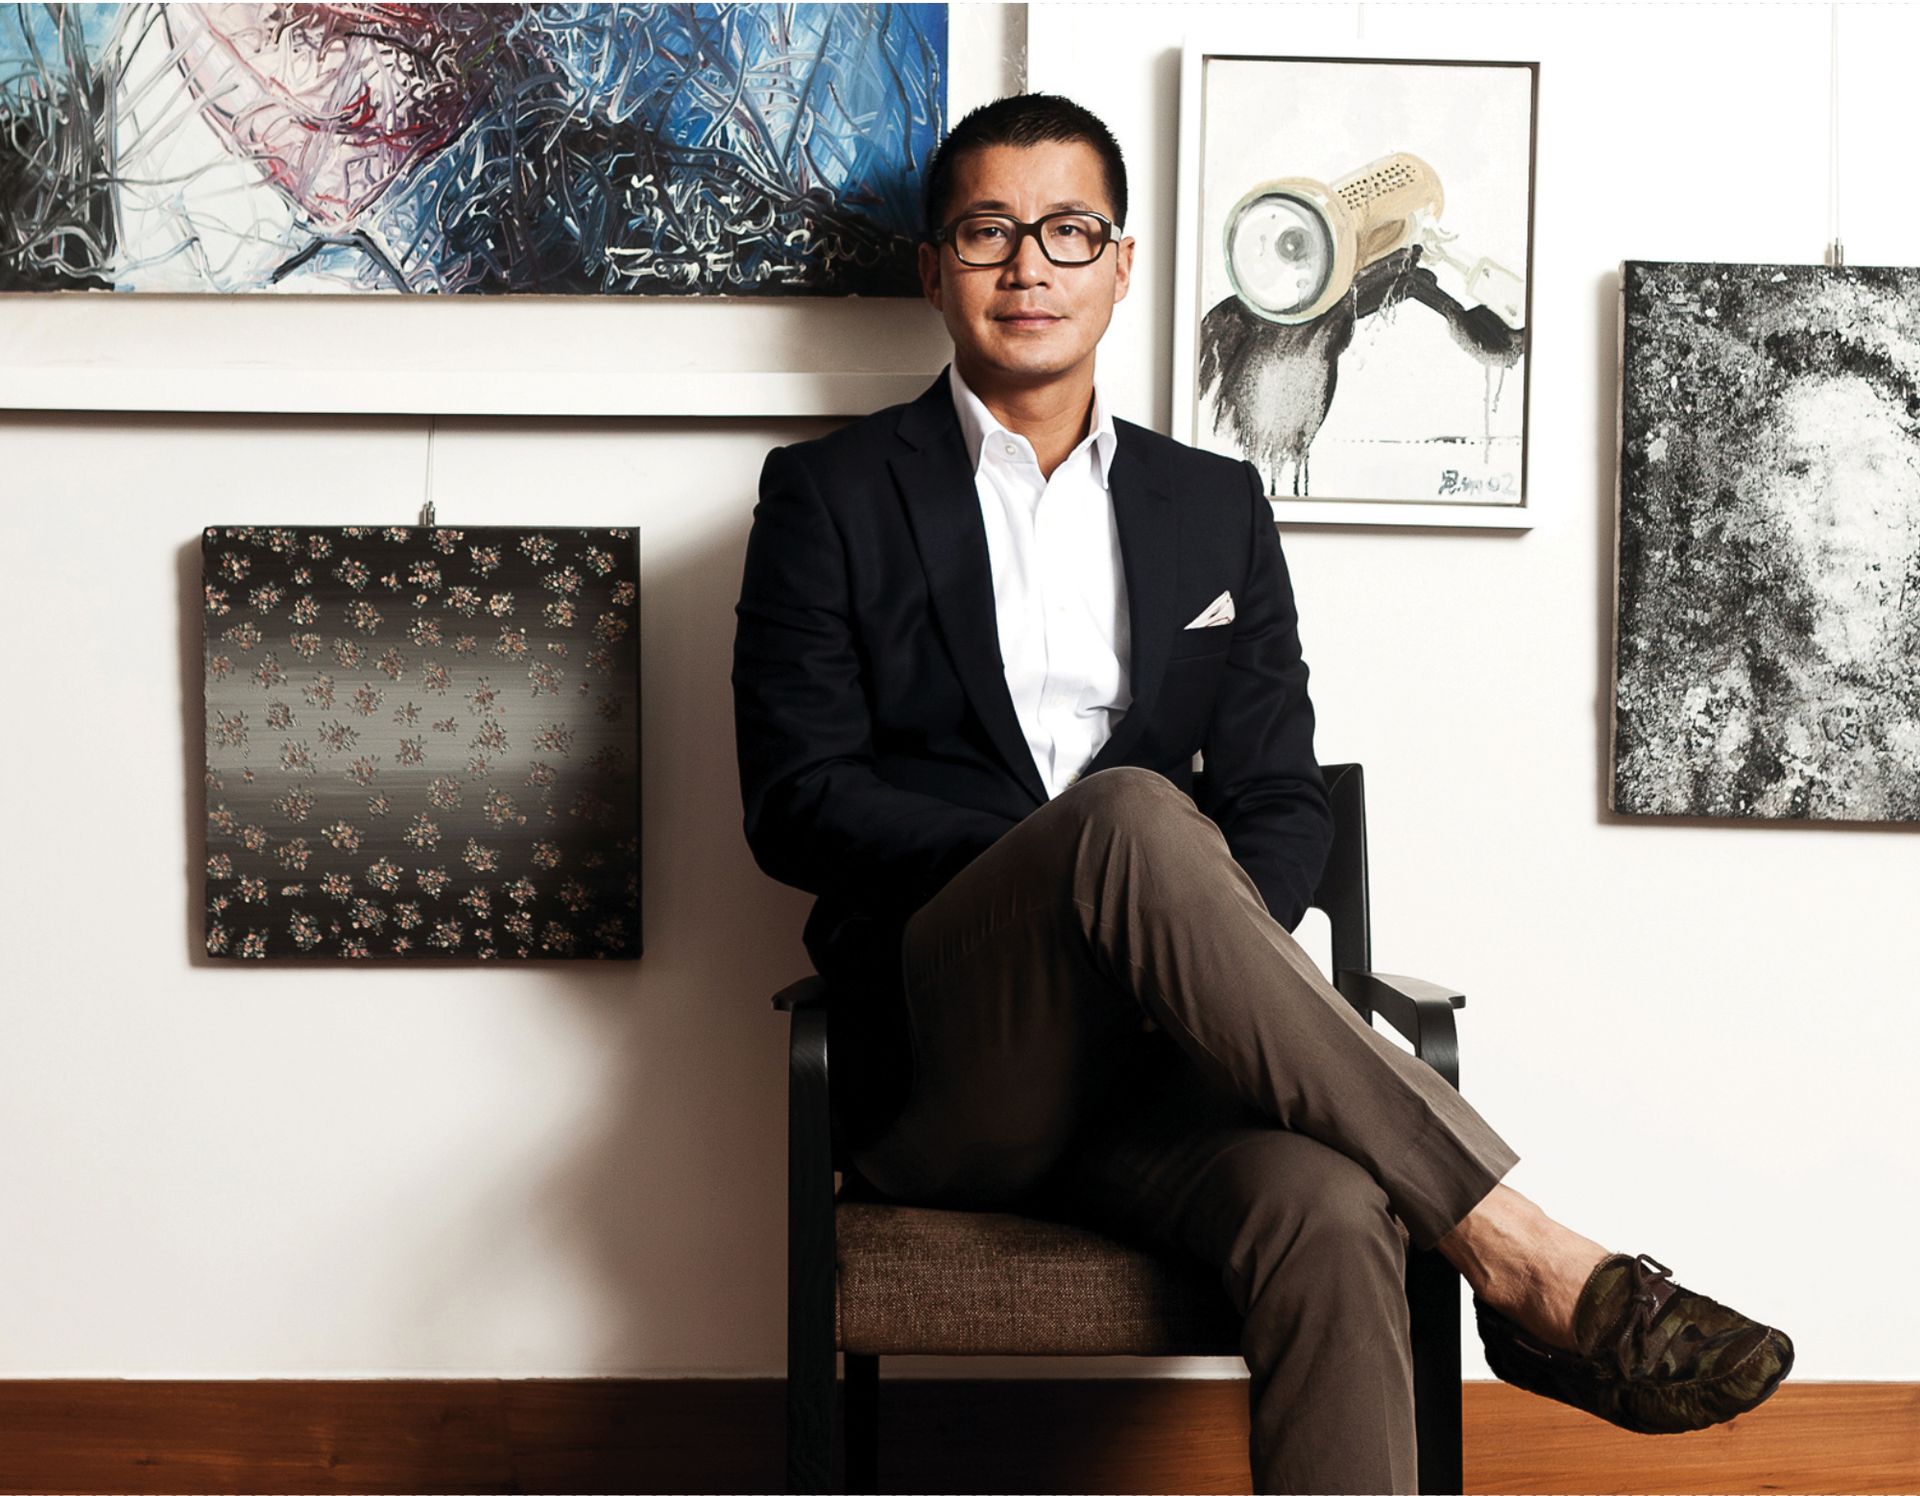 William Zhao is a keen collector of Picasso works Photo: courtesy of William Zhao